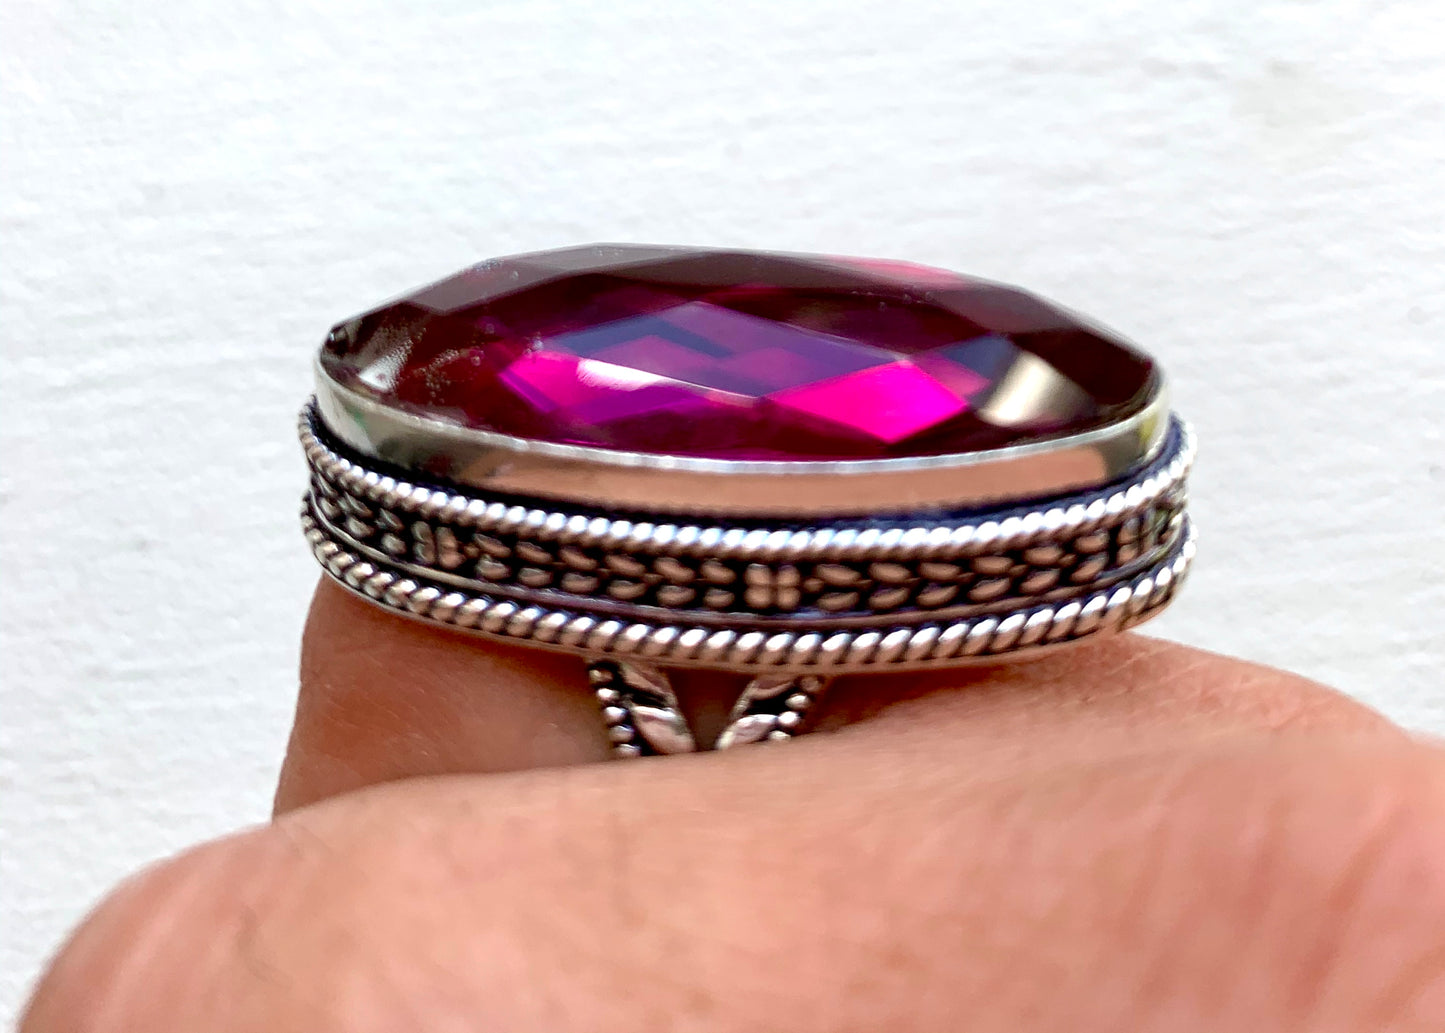 Ruby Faceted Crystal Ring - Crystalboutique.co.uk